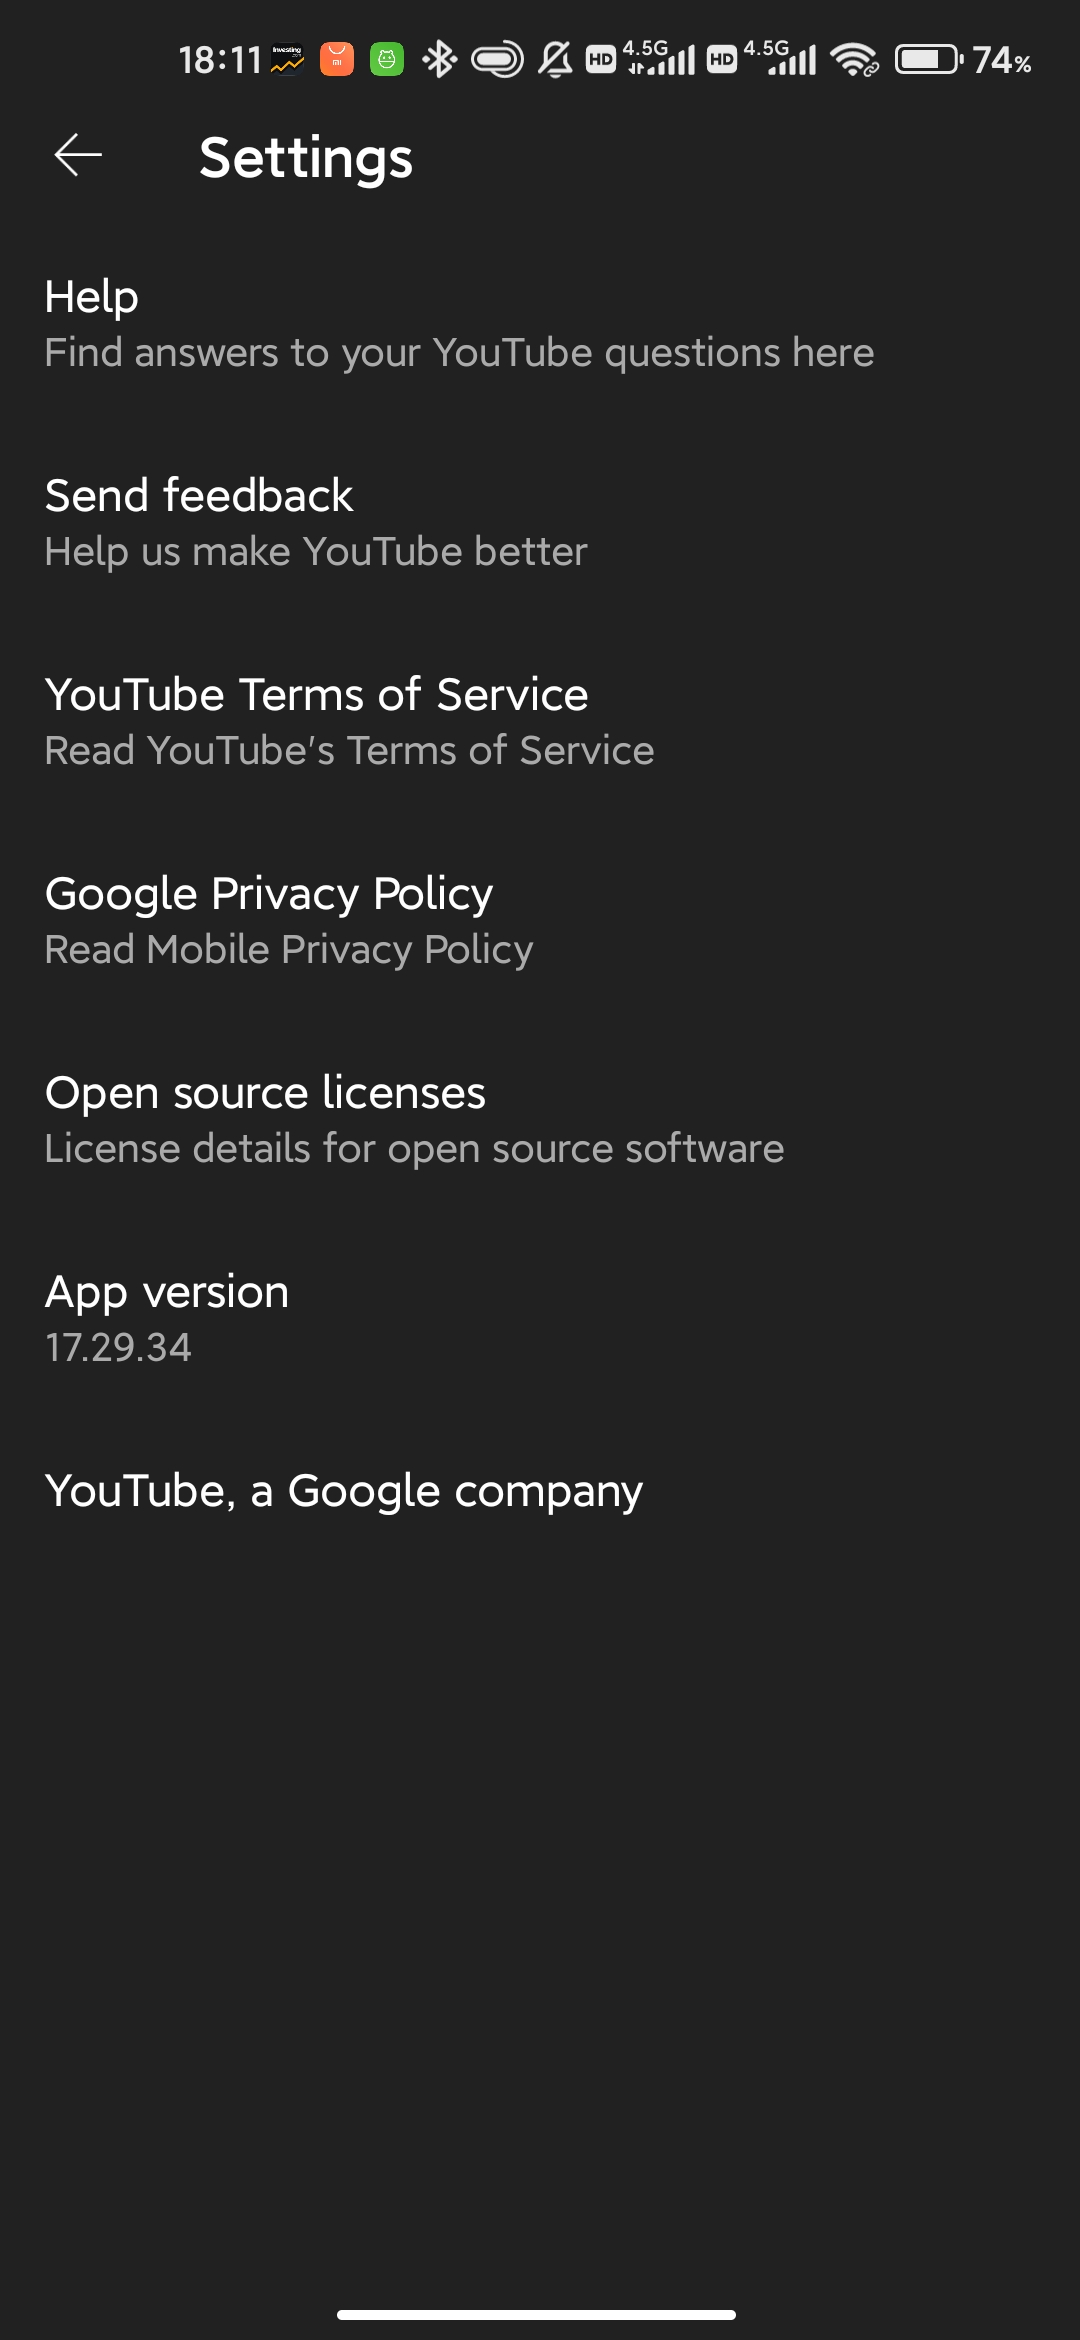 YouTube app with 17.29.34